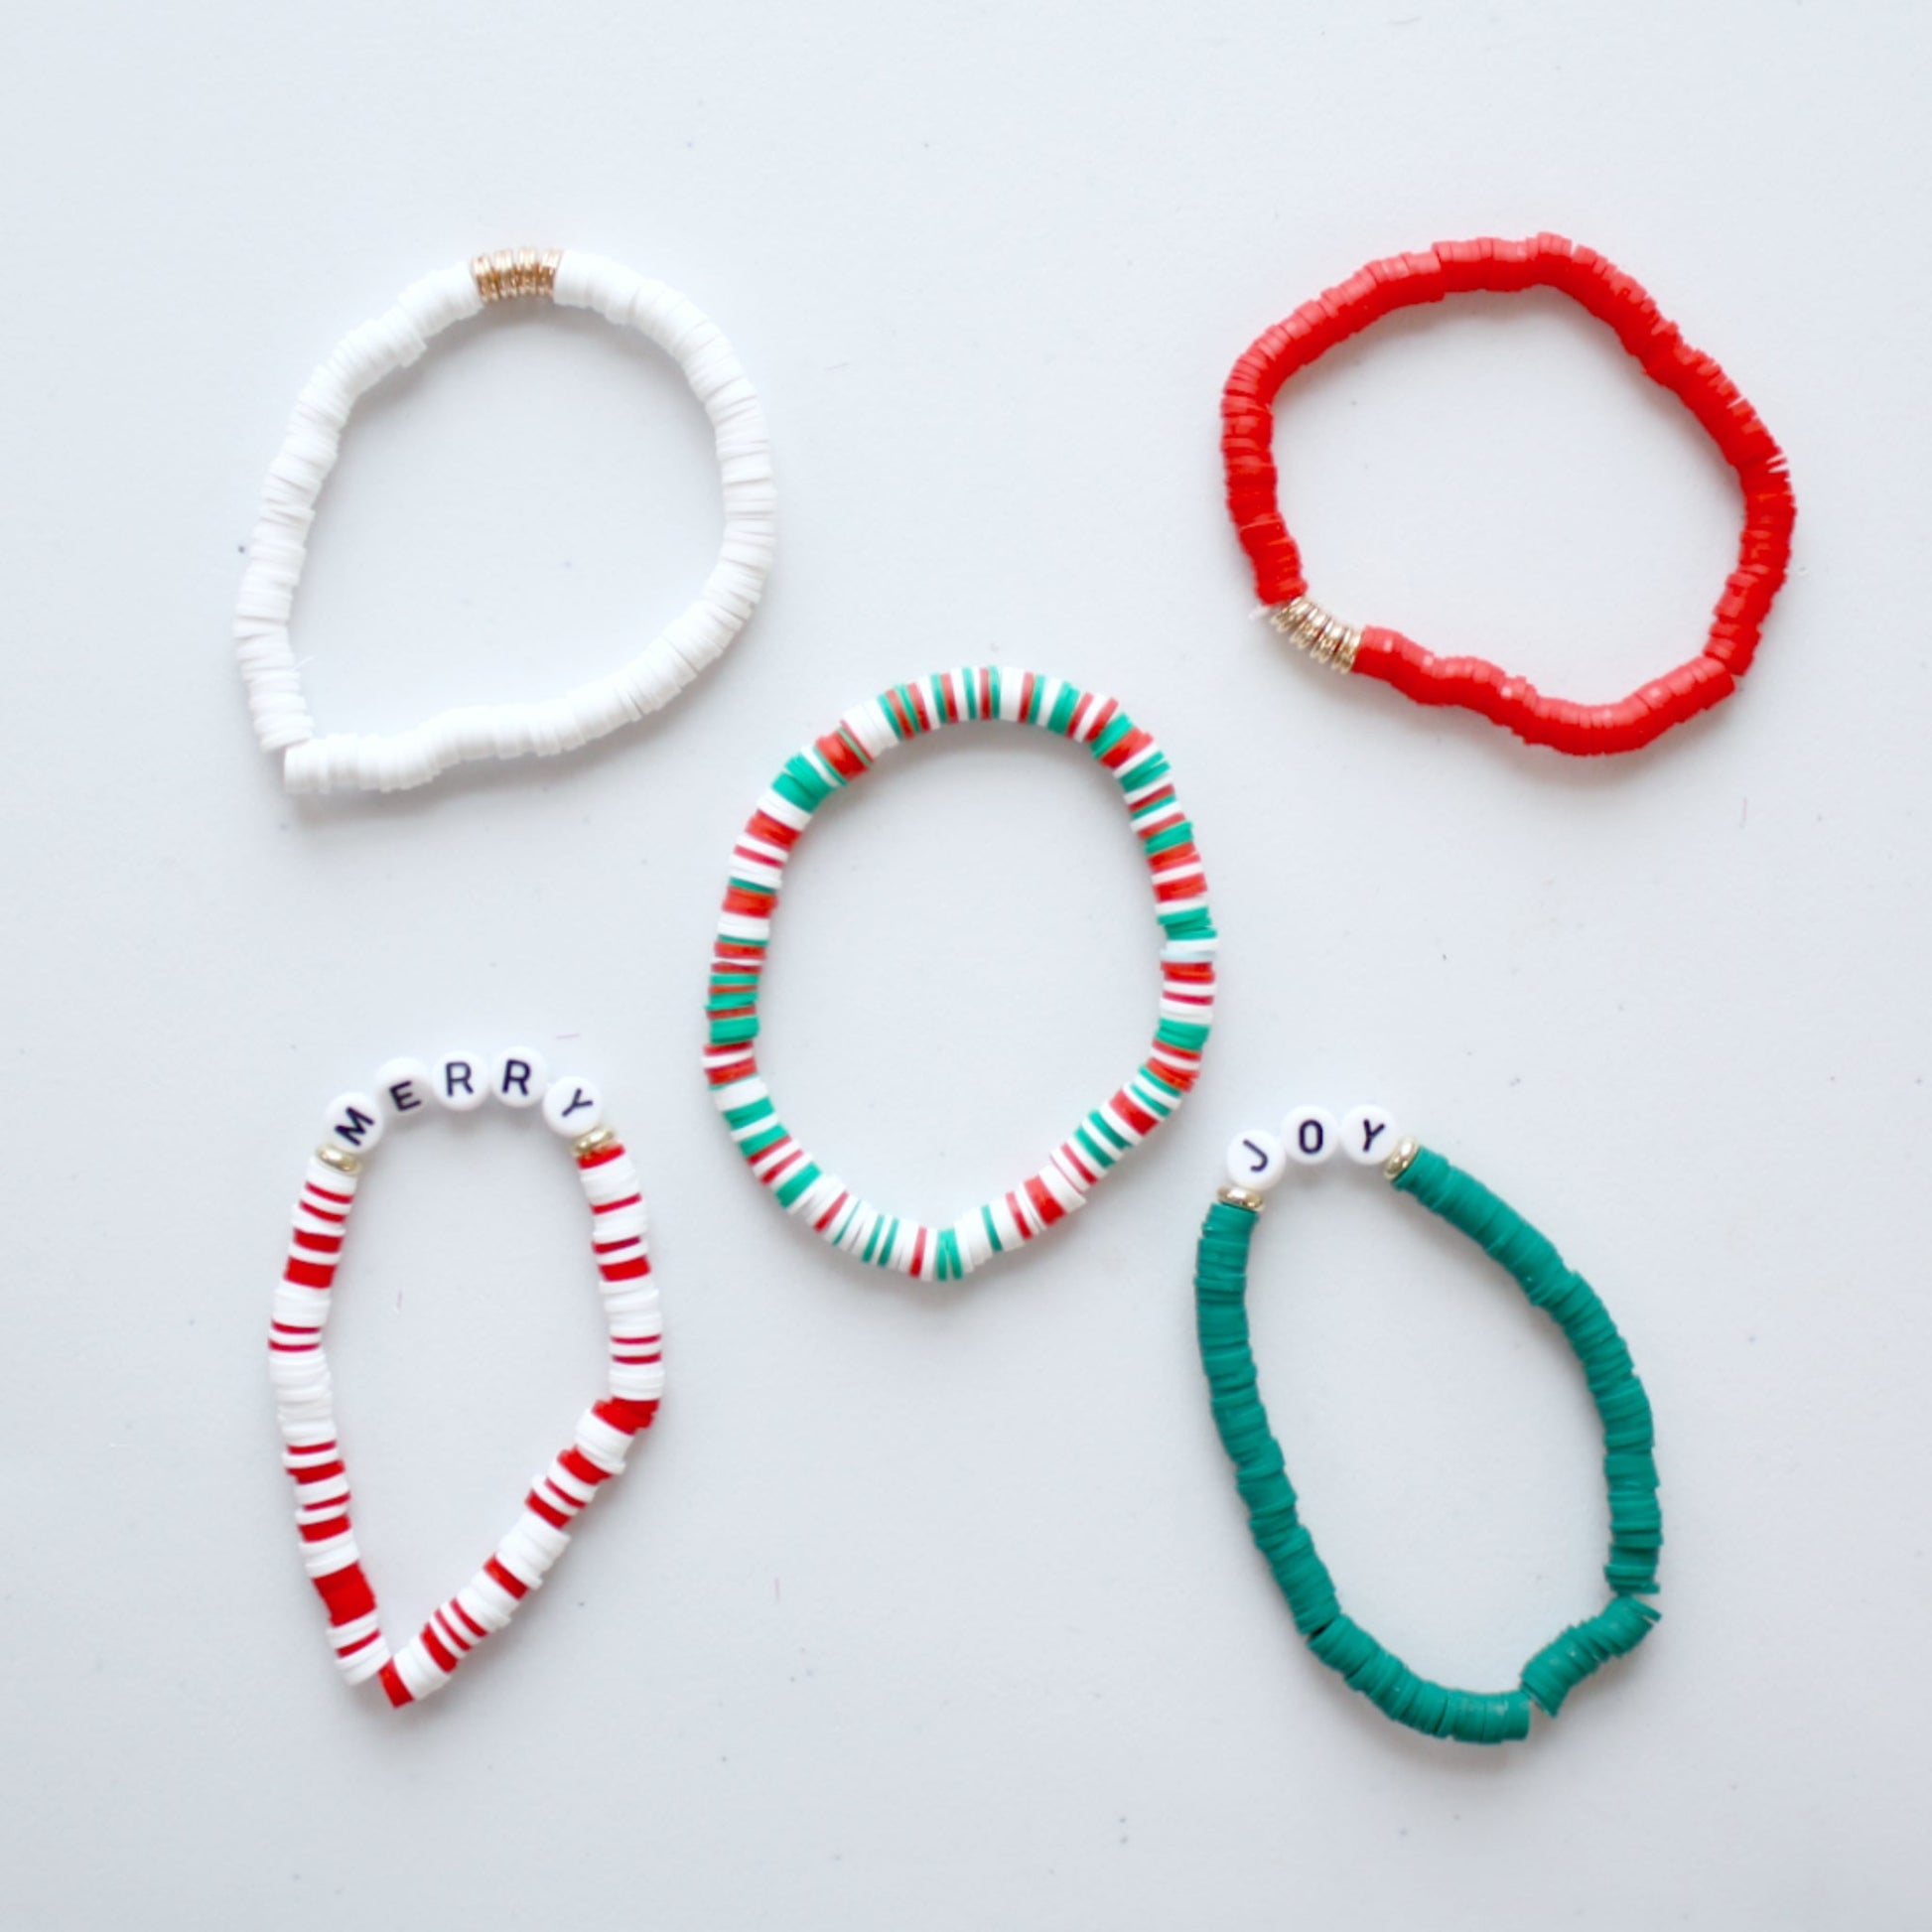 Set of Joy and Merry Christmas Stretch Stacking Bracelets - Made in the USA